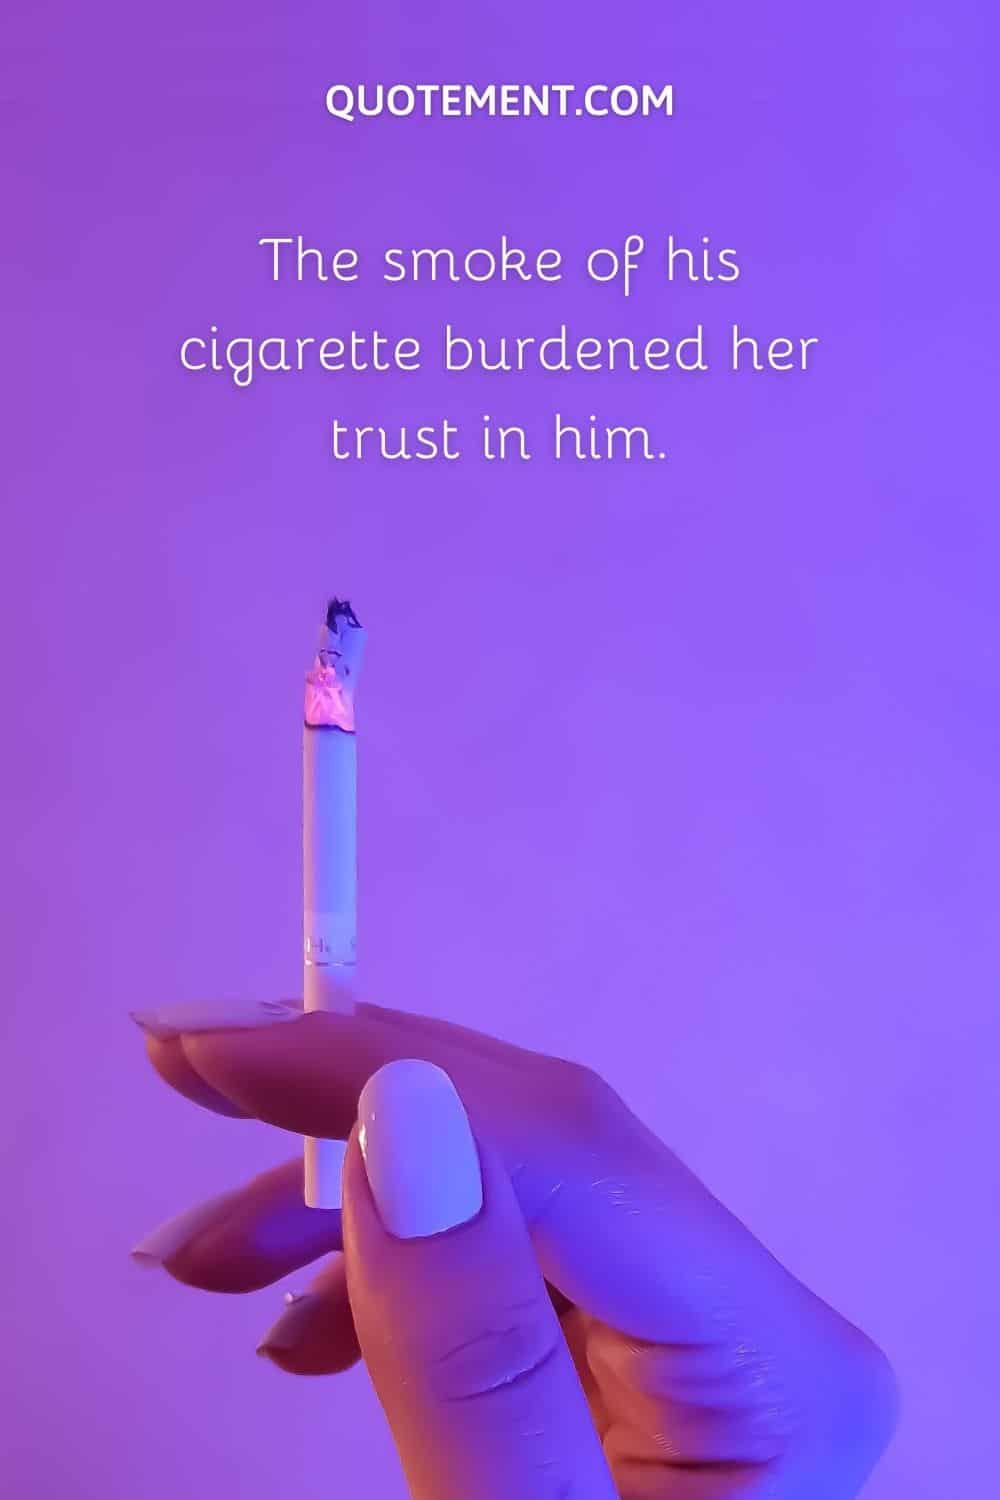 The smoke of his cigarette burdened her trust in him